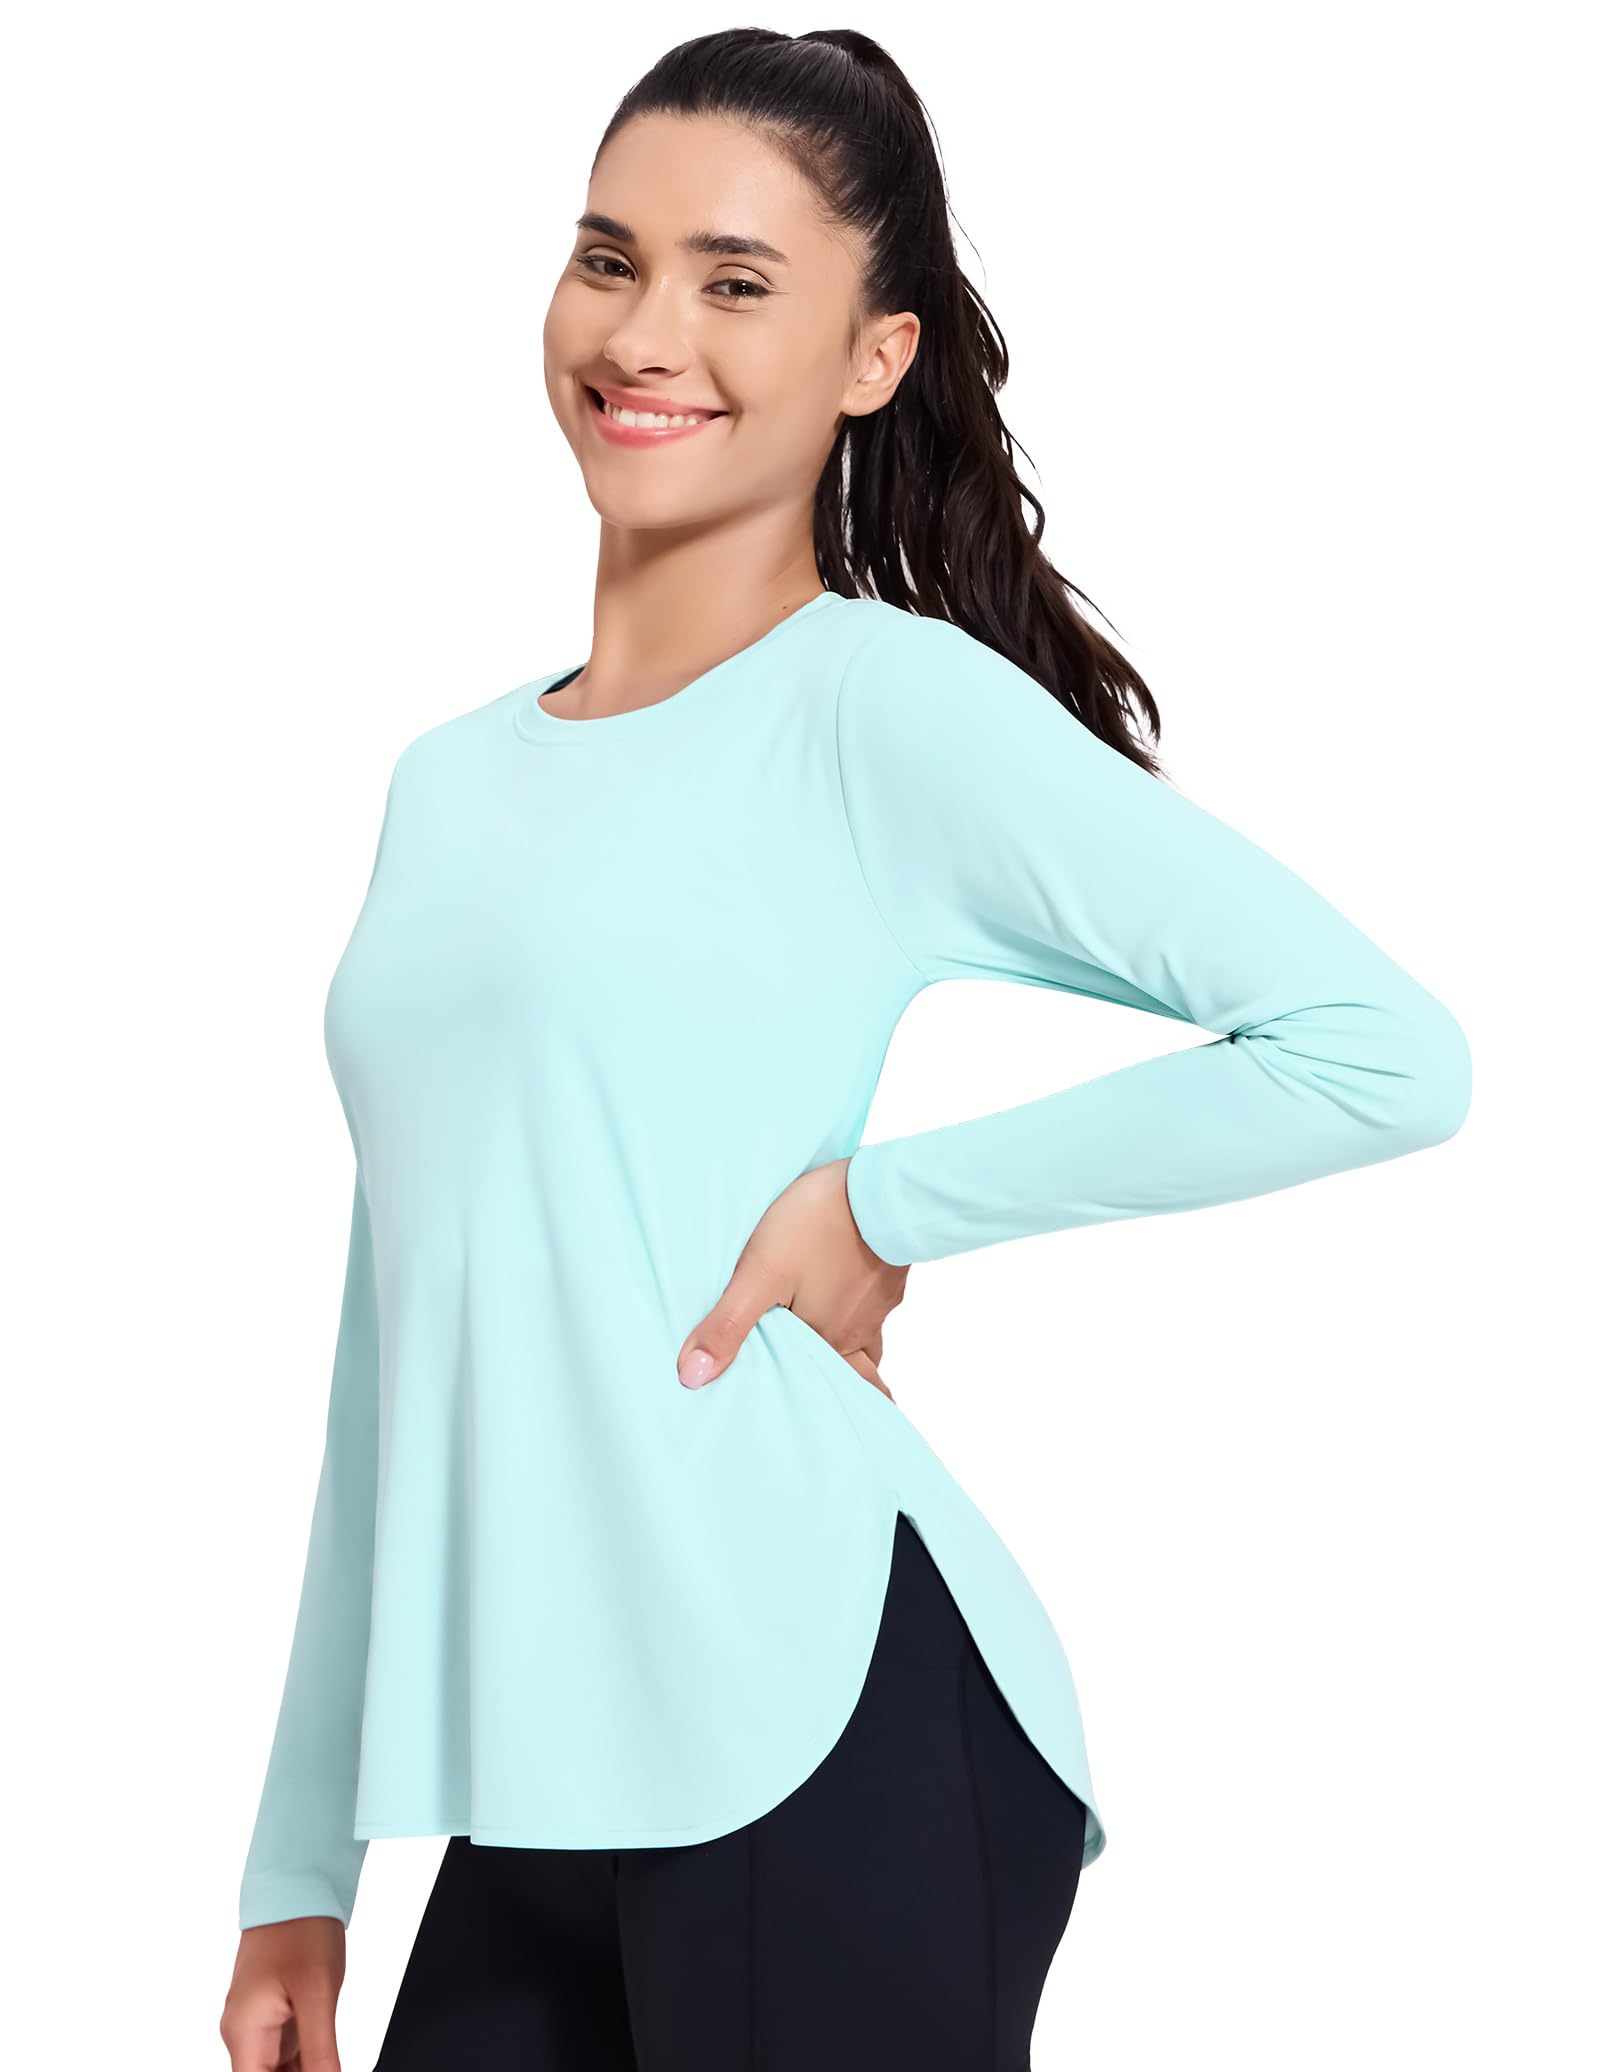 Women's UPF 50+ Sun Shirts Athletic Dry Fit Tops